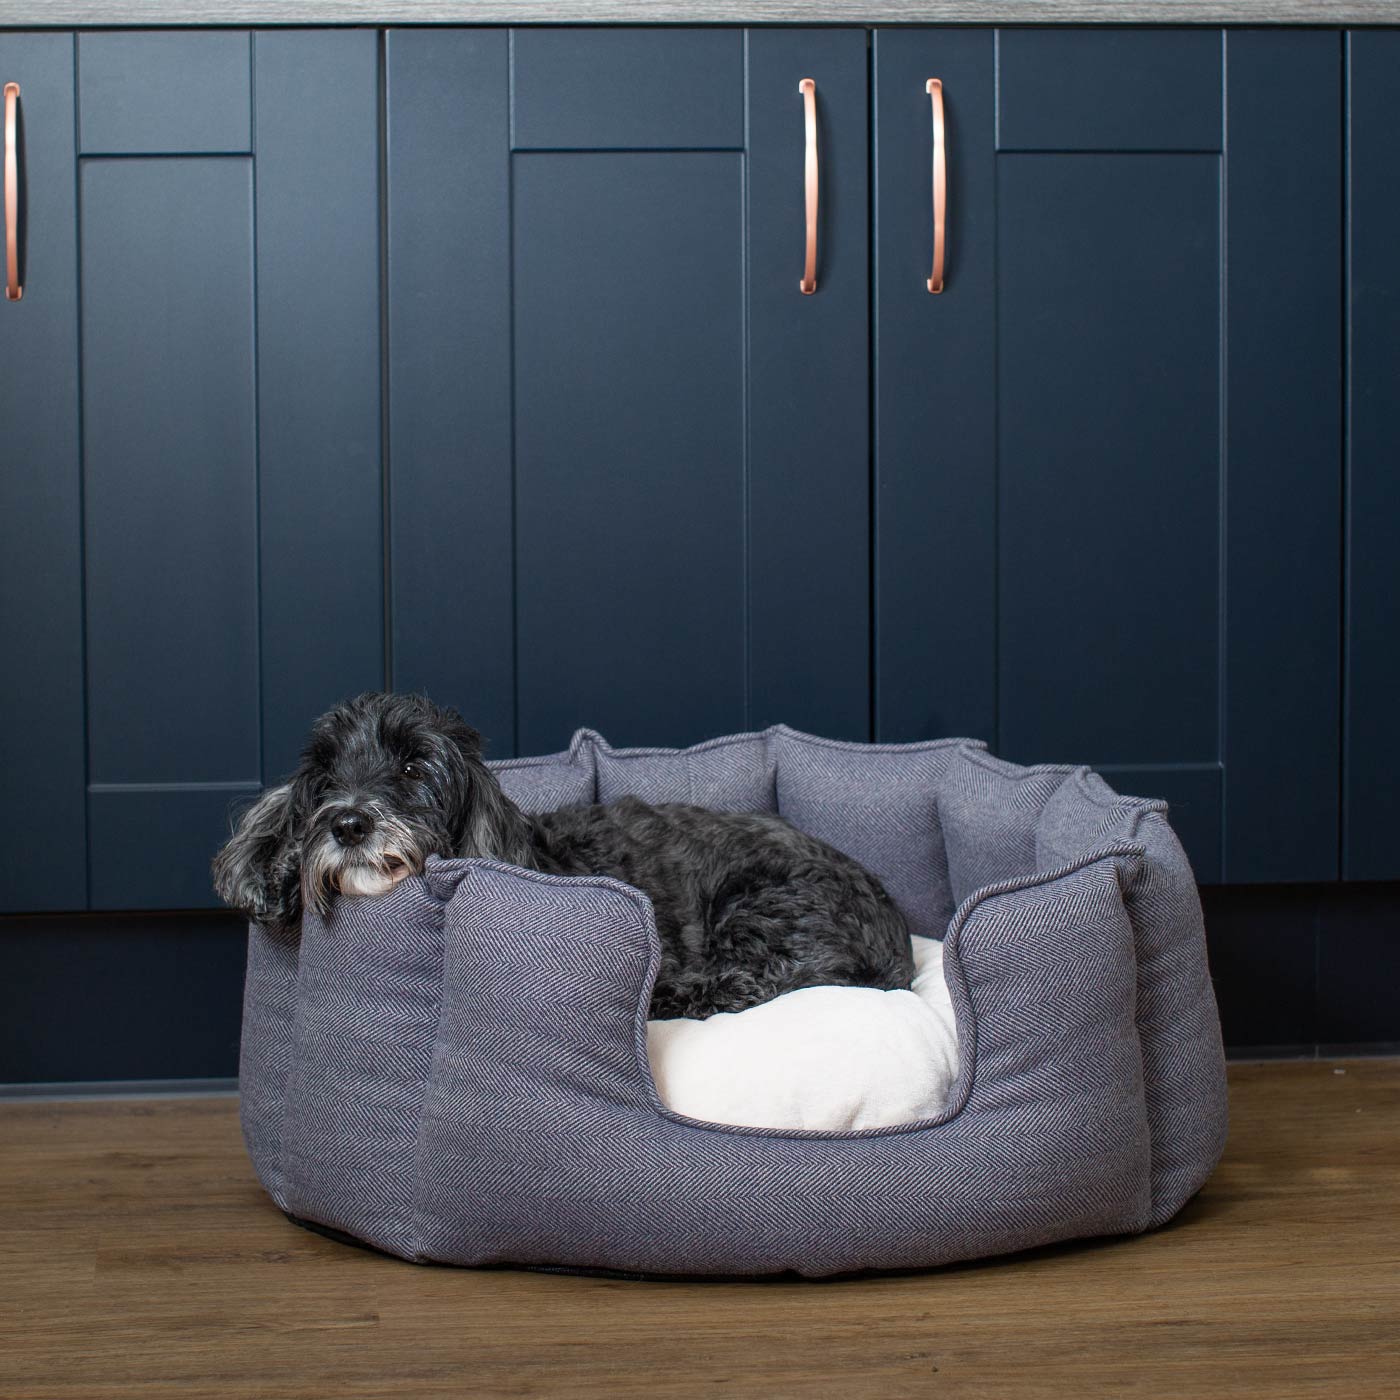 Discover Our Luxurious High Wall Bed For Dogs, Featuring inner pillow with plush teddy fleece on one side To Craft The Perfect Dogs Bed In Stunning Oxford Herringbone Tweed! Available To Personalize Now at Lords & Labradors US